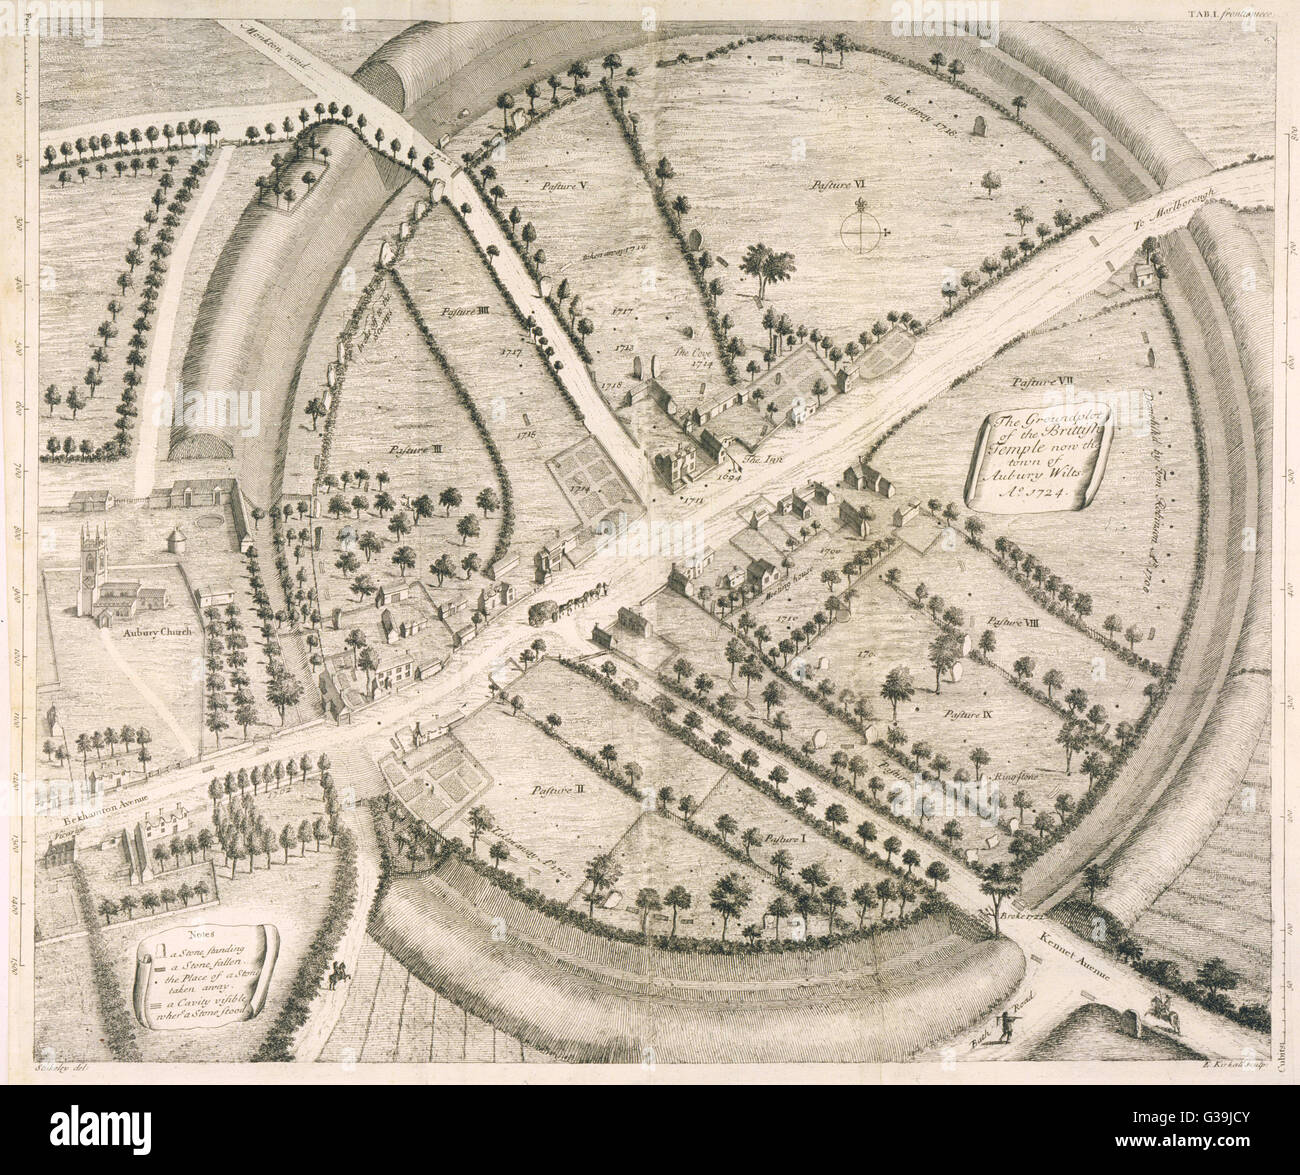 A beautifully drawn overhead  plan of the stone circles and  embankment ditches at Avebury.  Stukeley's accuracy is  impressive, charting every stone, pasture and building.     Date: 1743 Stock Photo